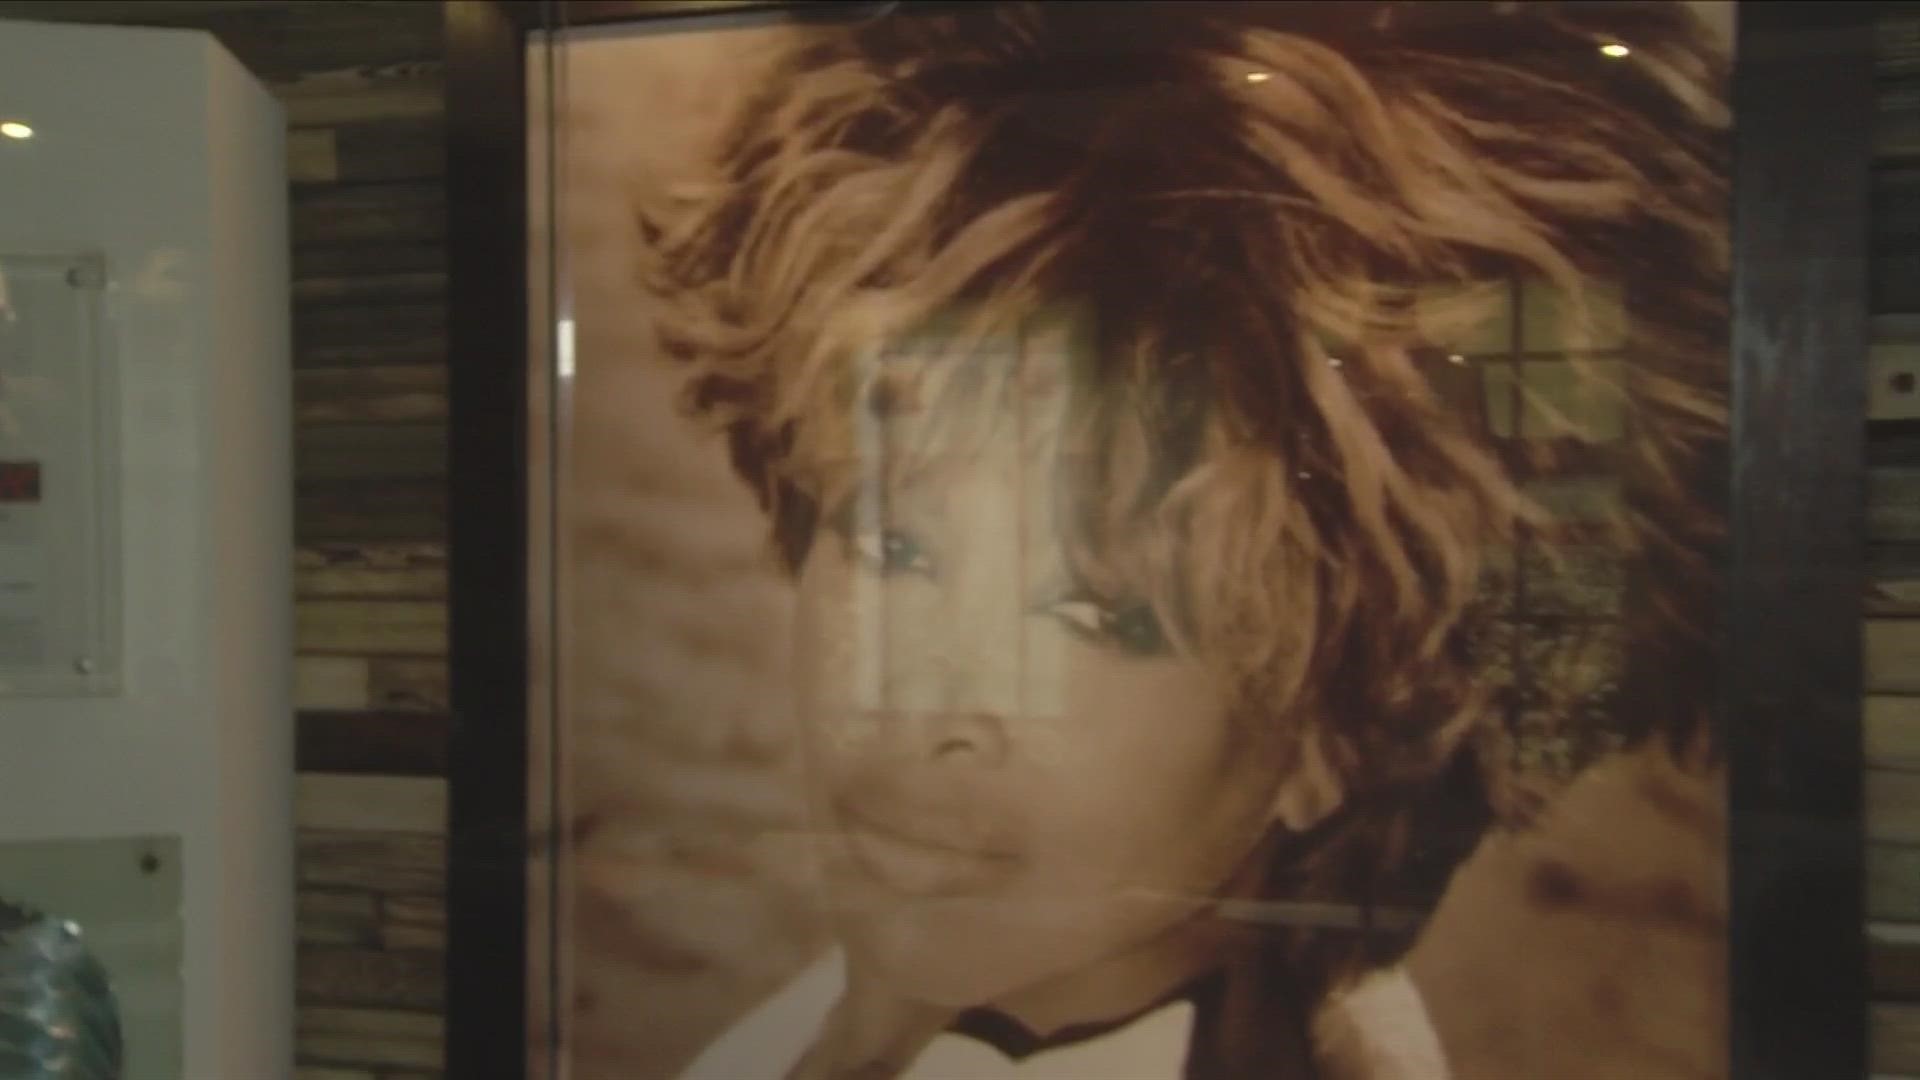 ABC24’s Jordan Foster visited the museum as the cast of Tina Turner the Musical hits the stage in Memphis.